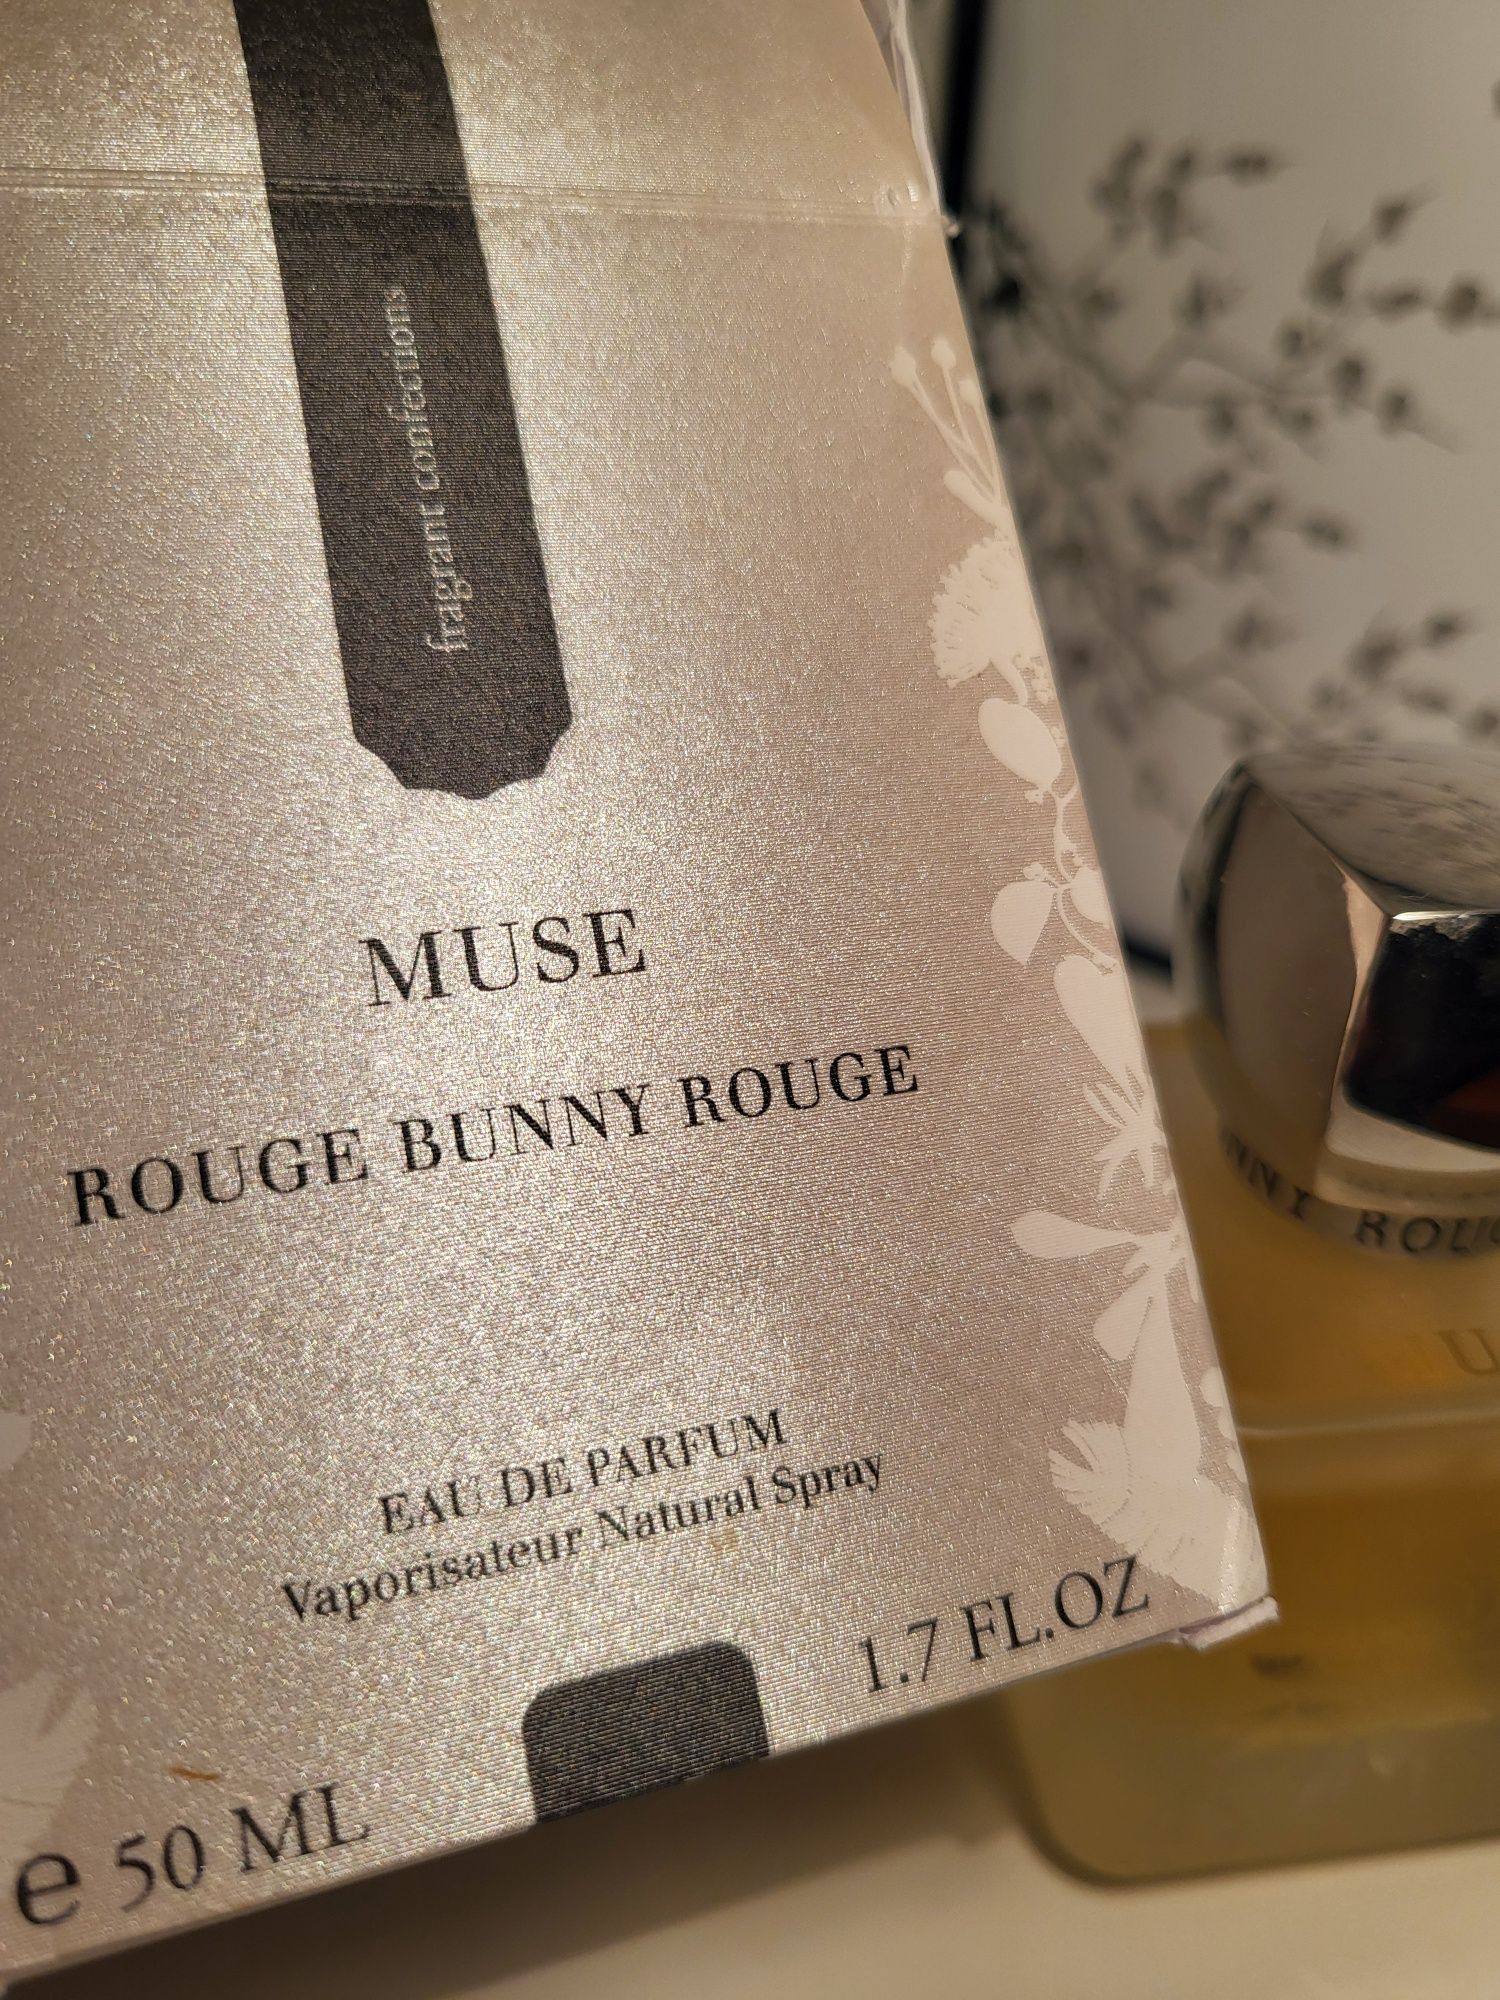 Rouge bunny rouge Muse.